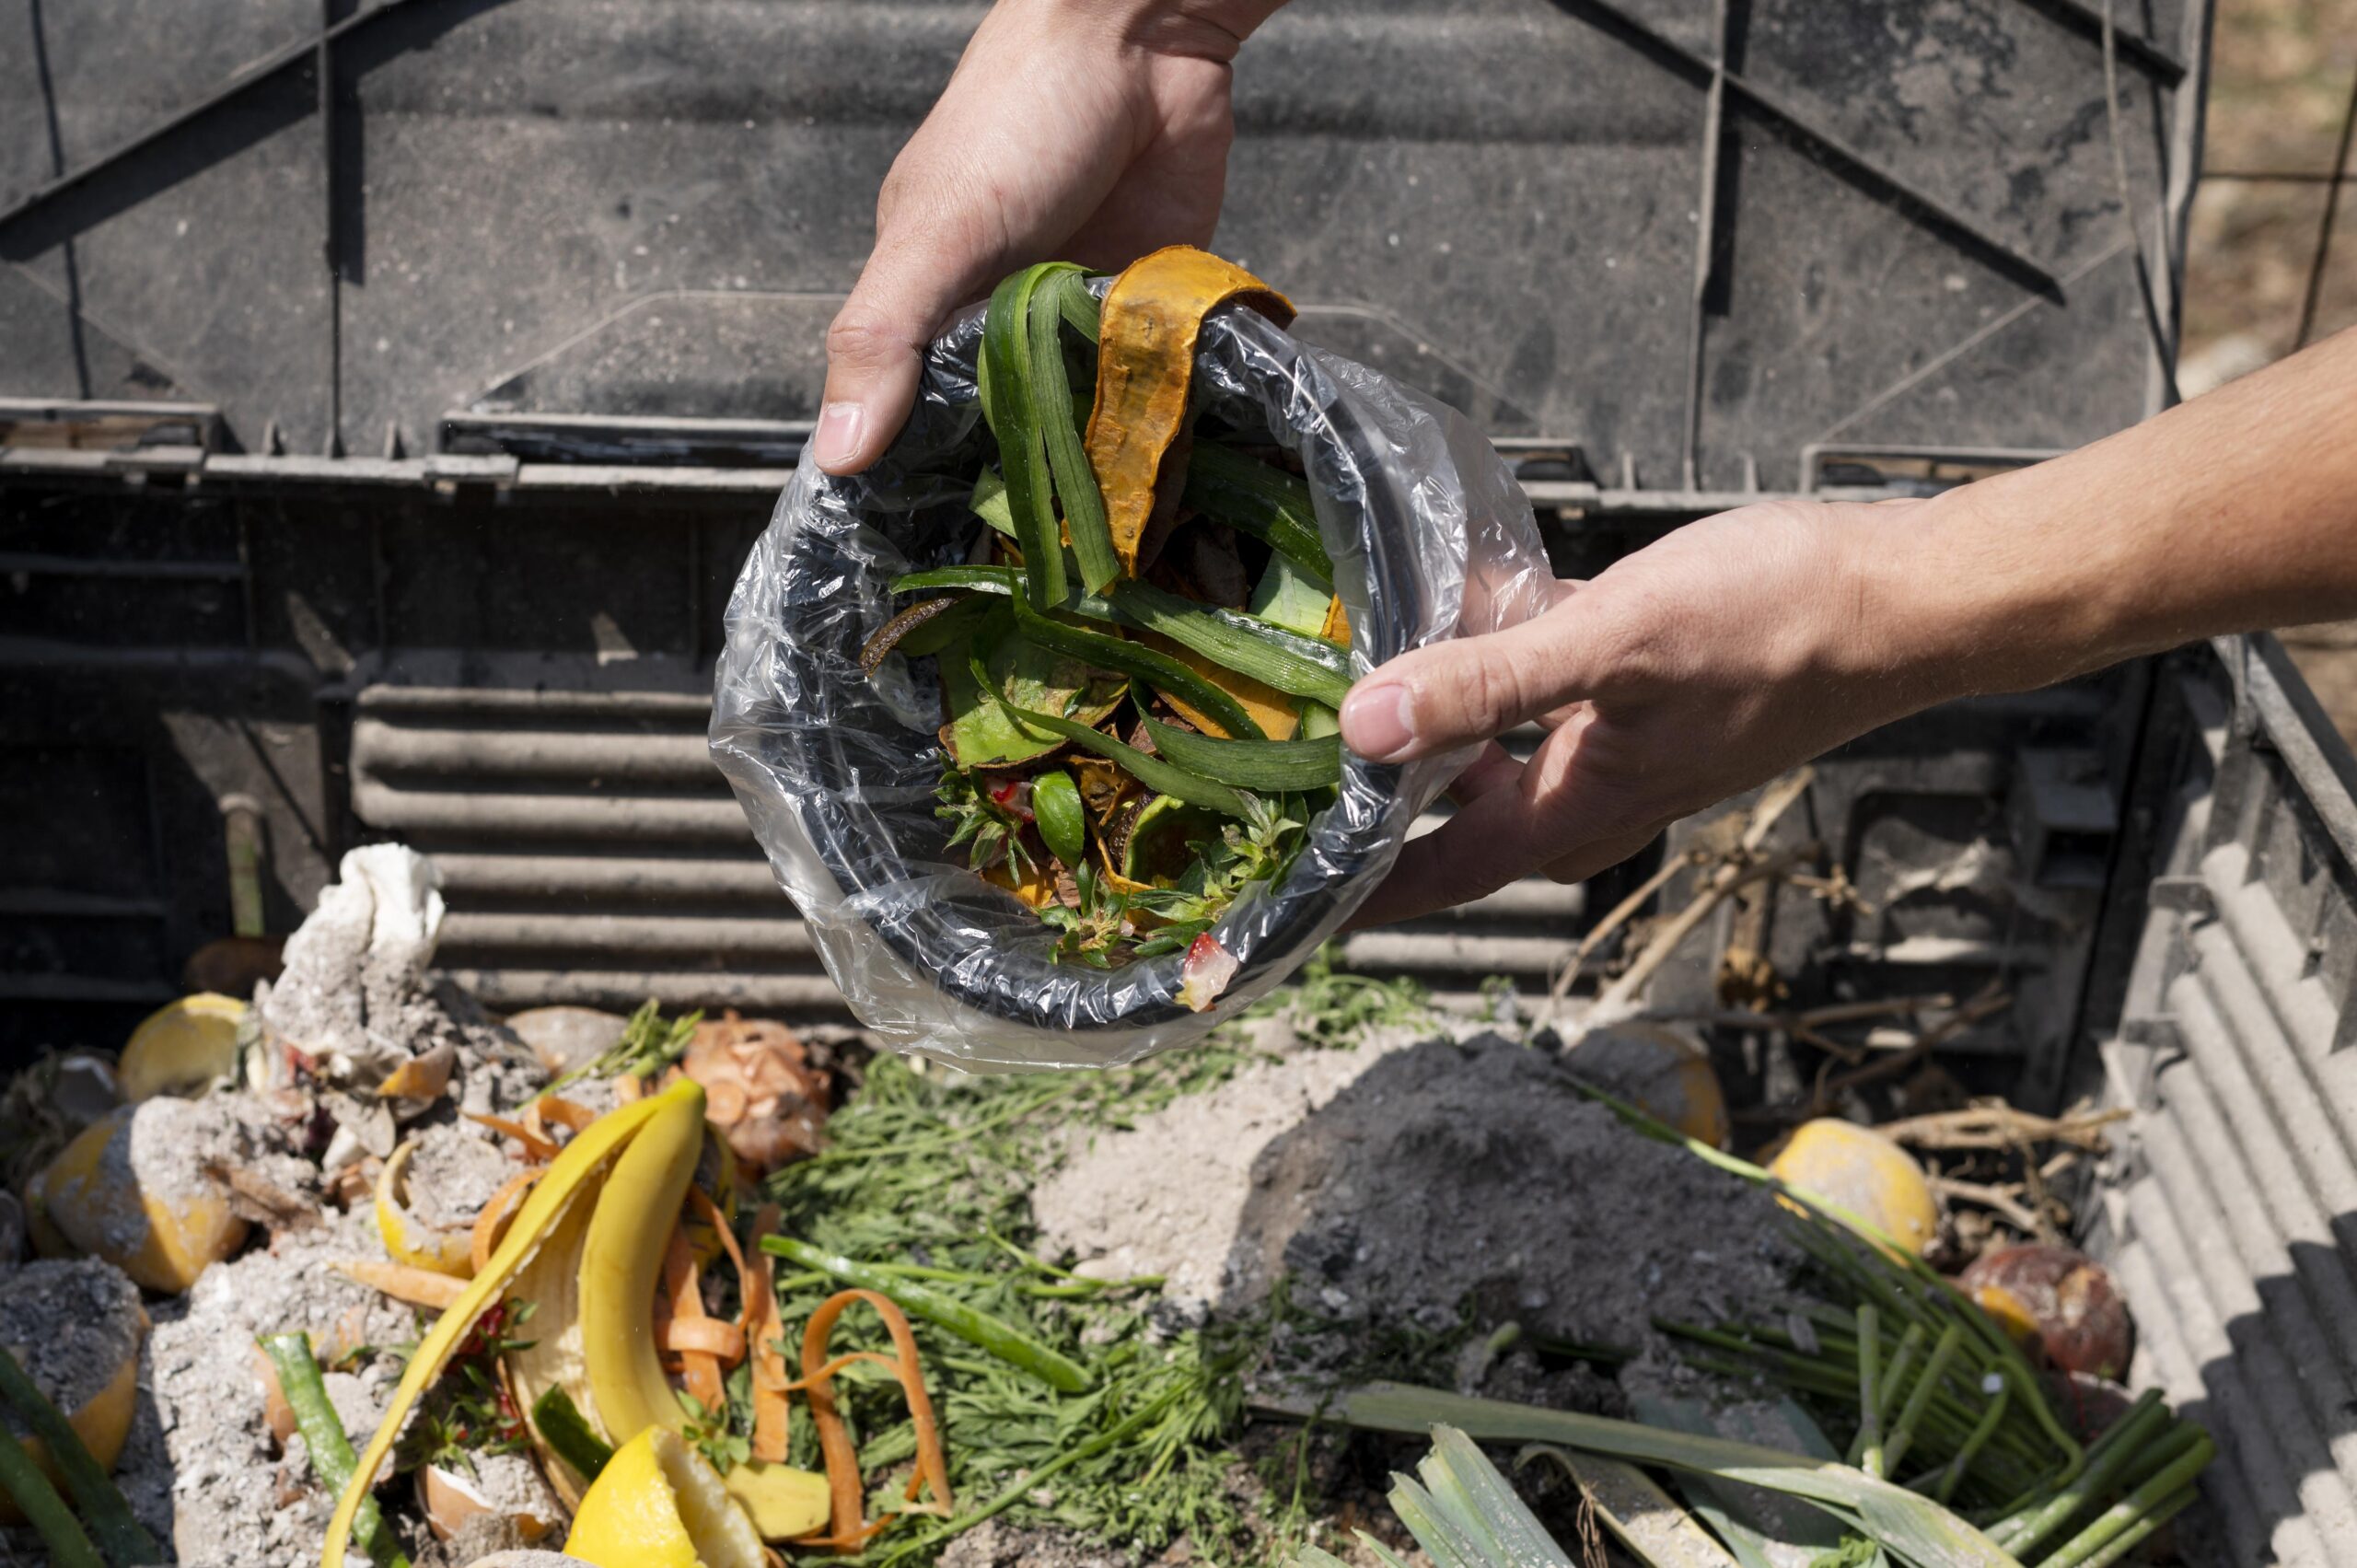 FOOD WASTE TO BIOGAS